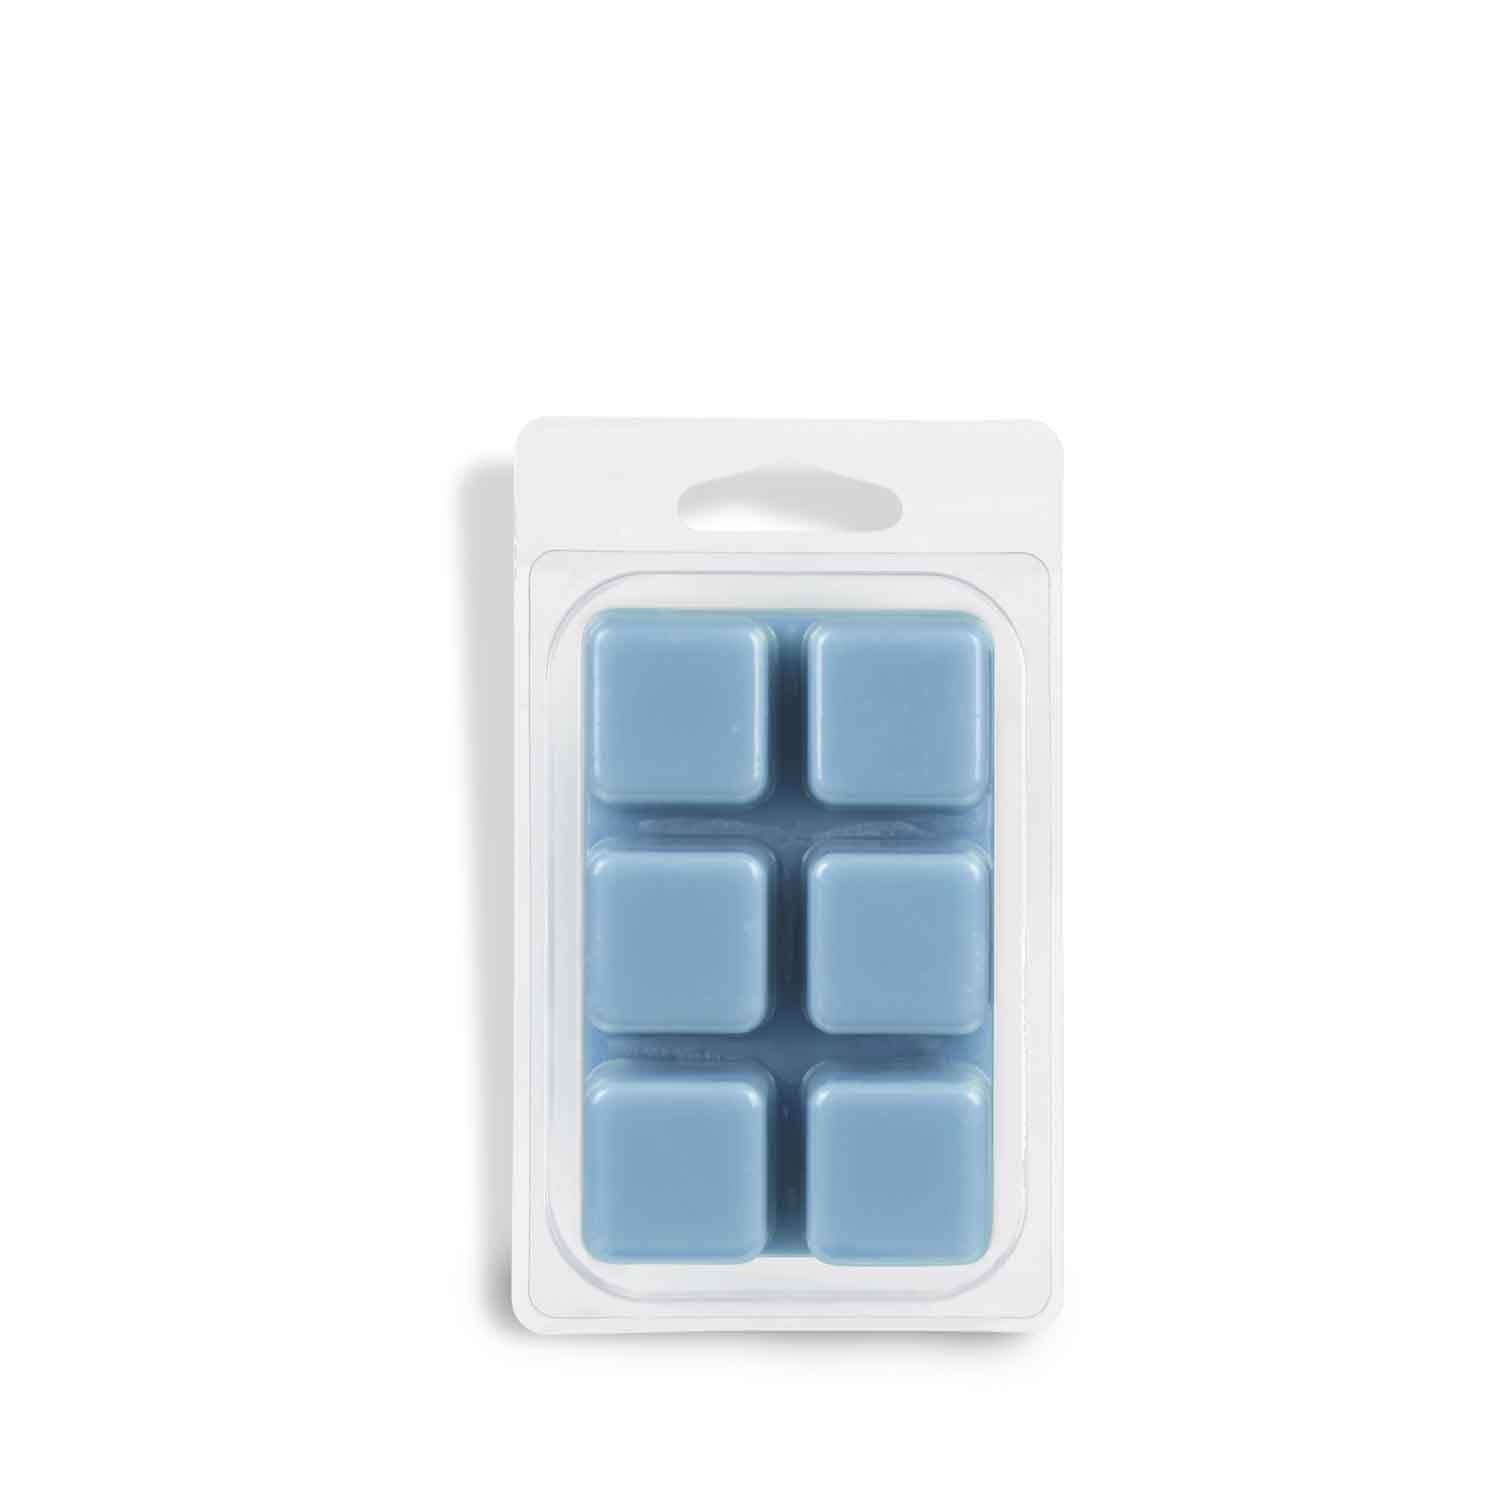 A pack of Sea Heather Scented Wax Melt (2.5 oz) from Tuscany Candle®, perfect for melting in a scented candle or wax melt tart bars, displayed on a clean white background.